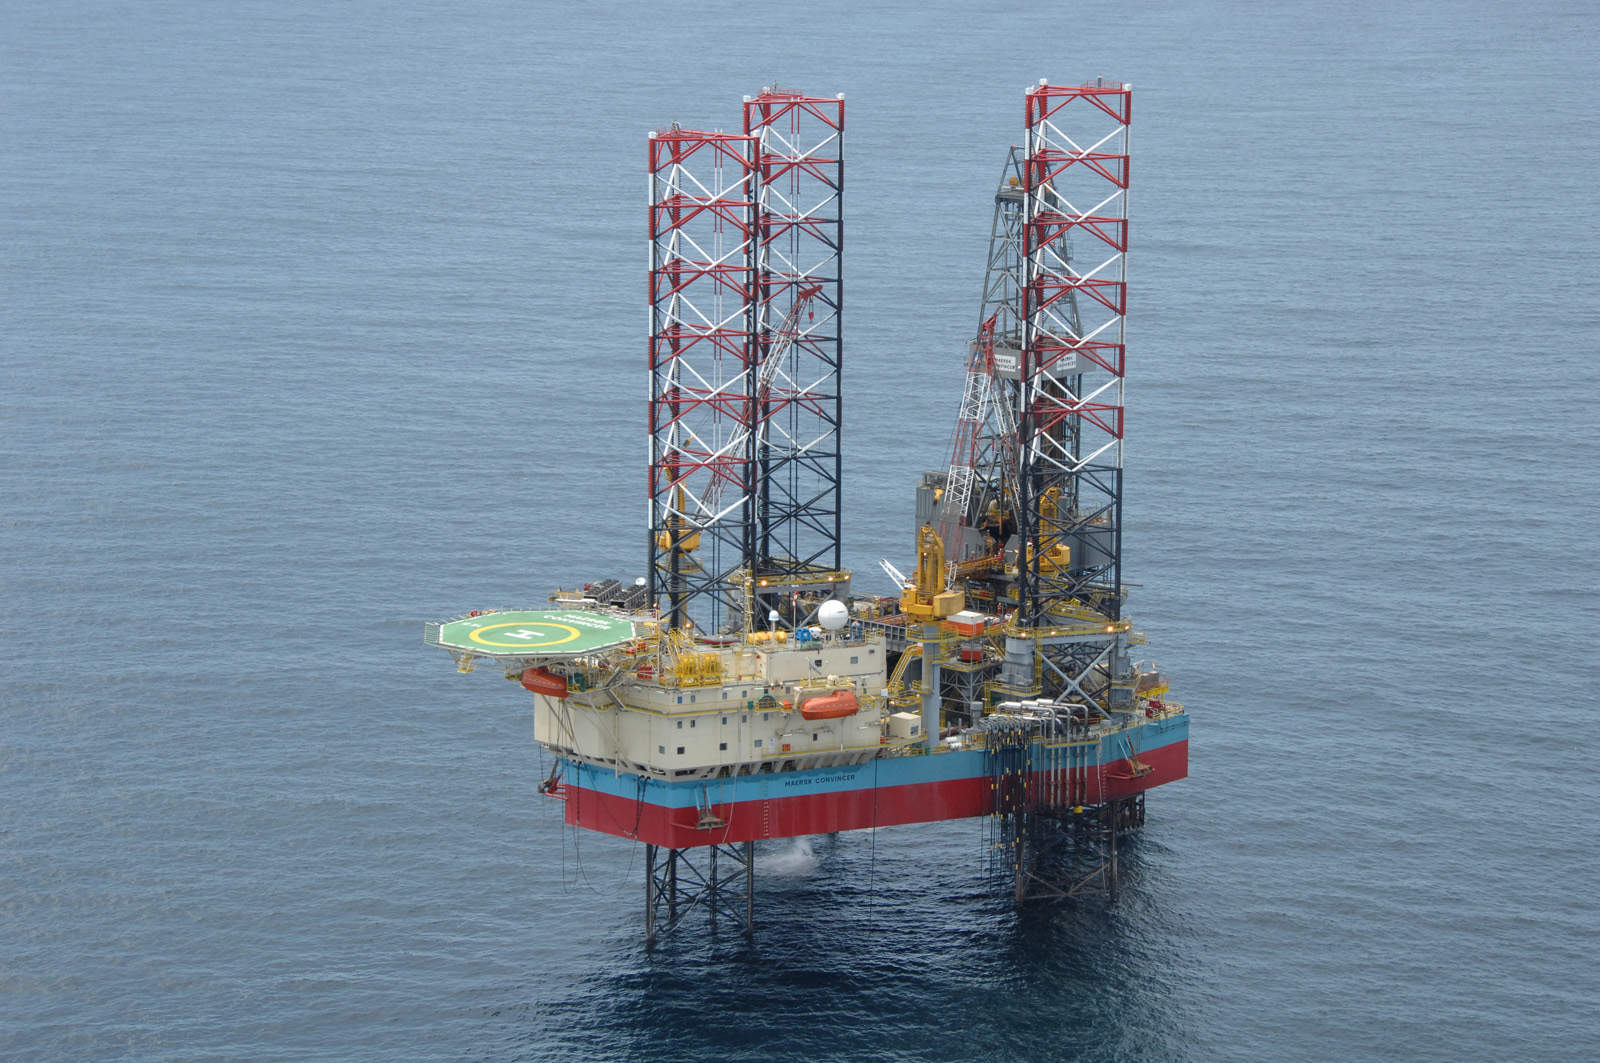 Brunei Shell Petroleum extends contract of Maersk Drilling’s Maersk Convincer rig